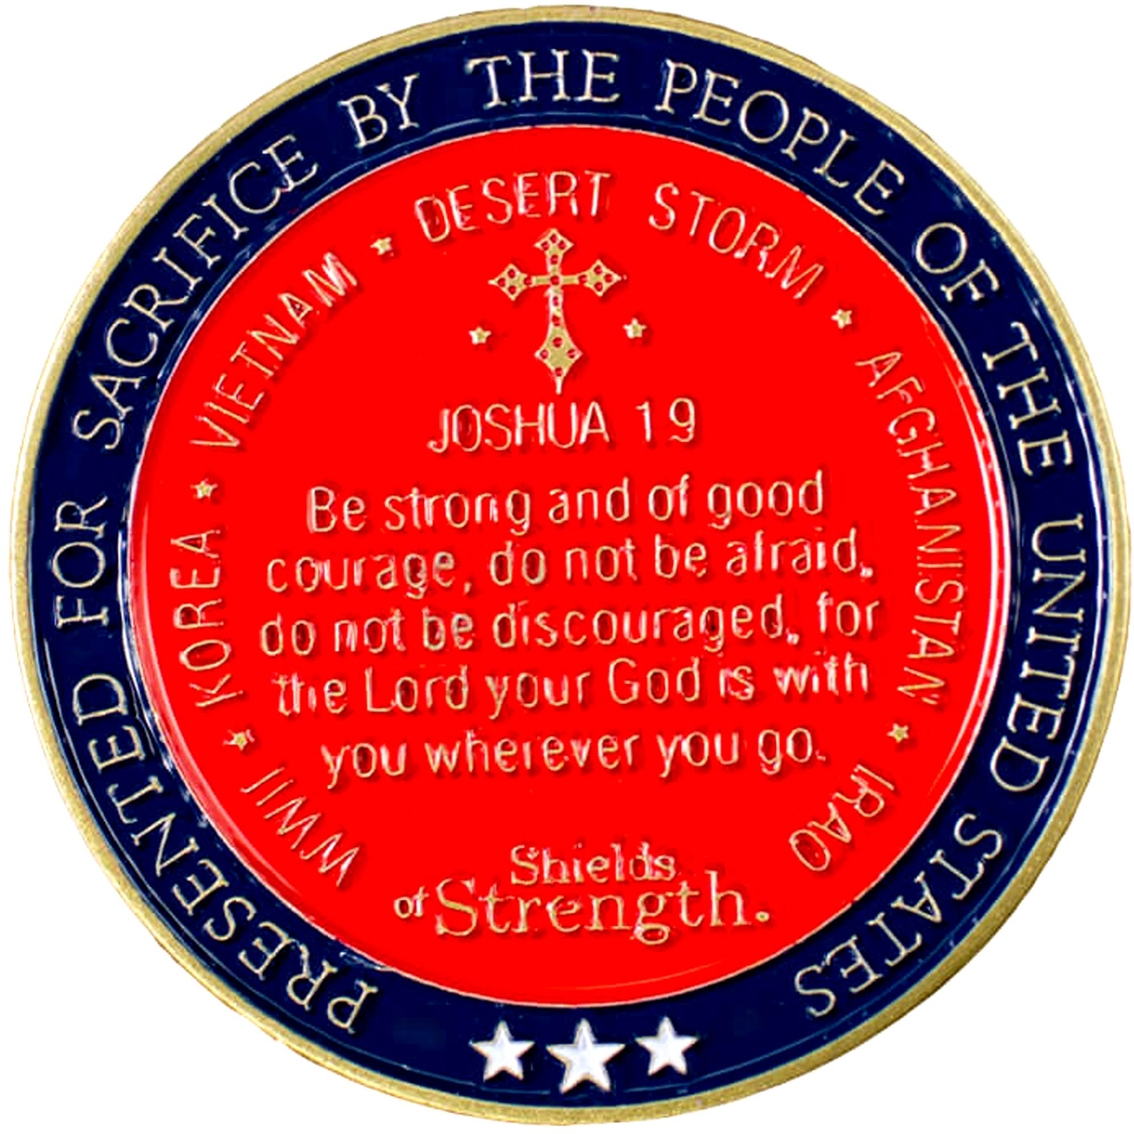 Shields of Strength Thank You Coin Joshua 1:9 - Image 2 of 2